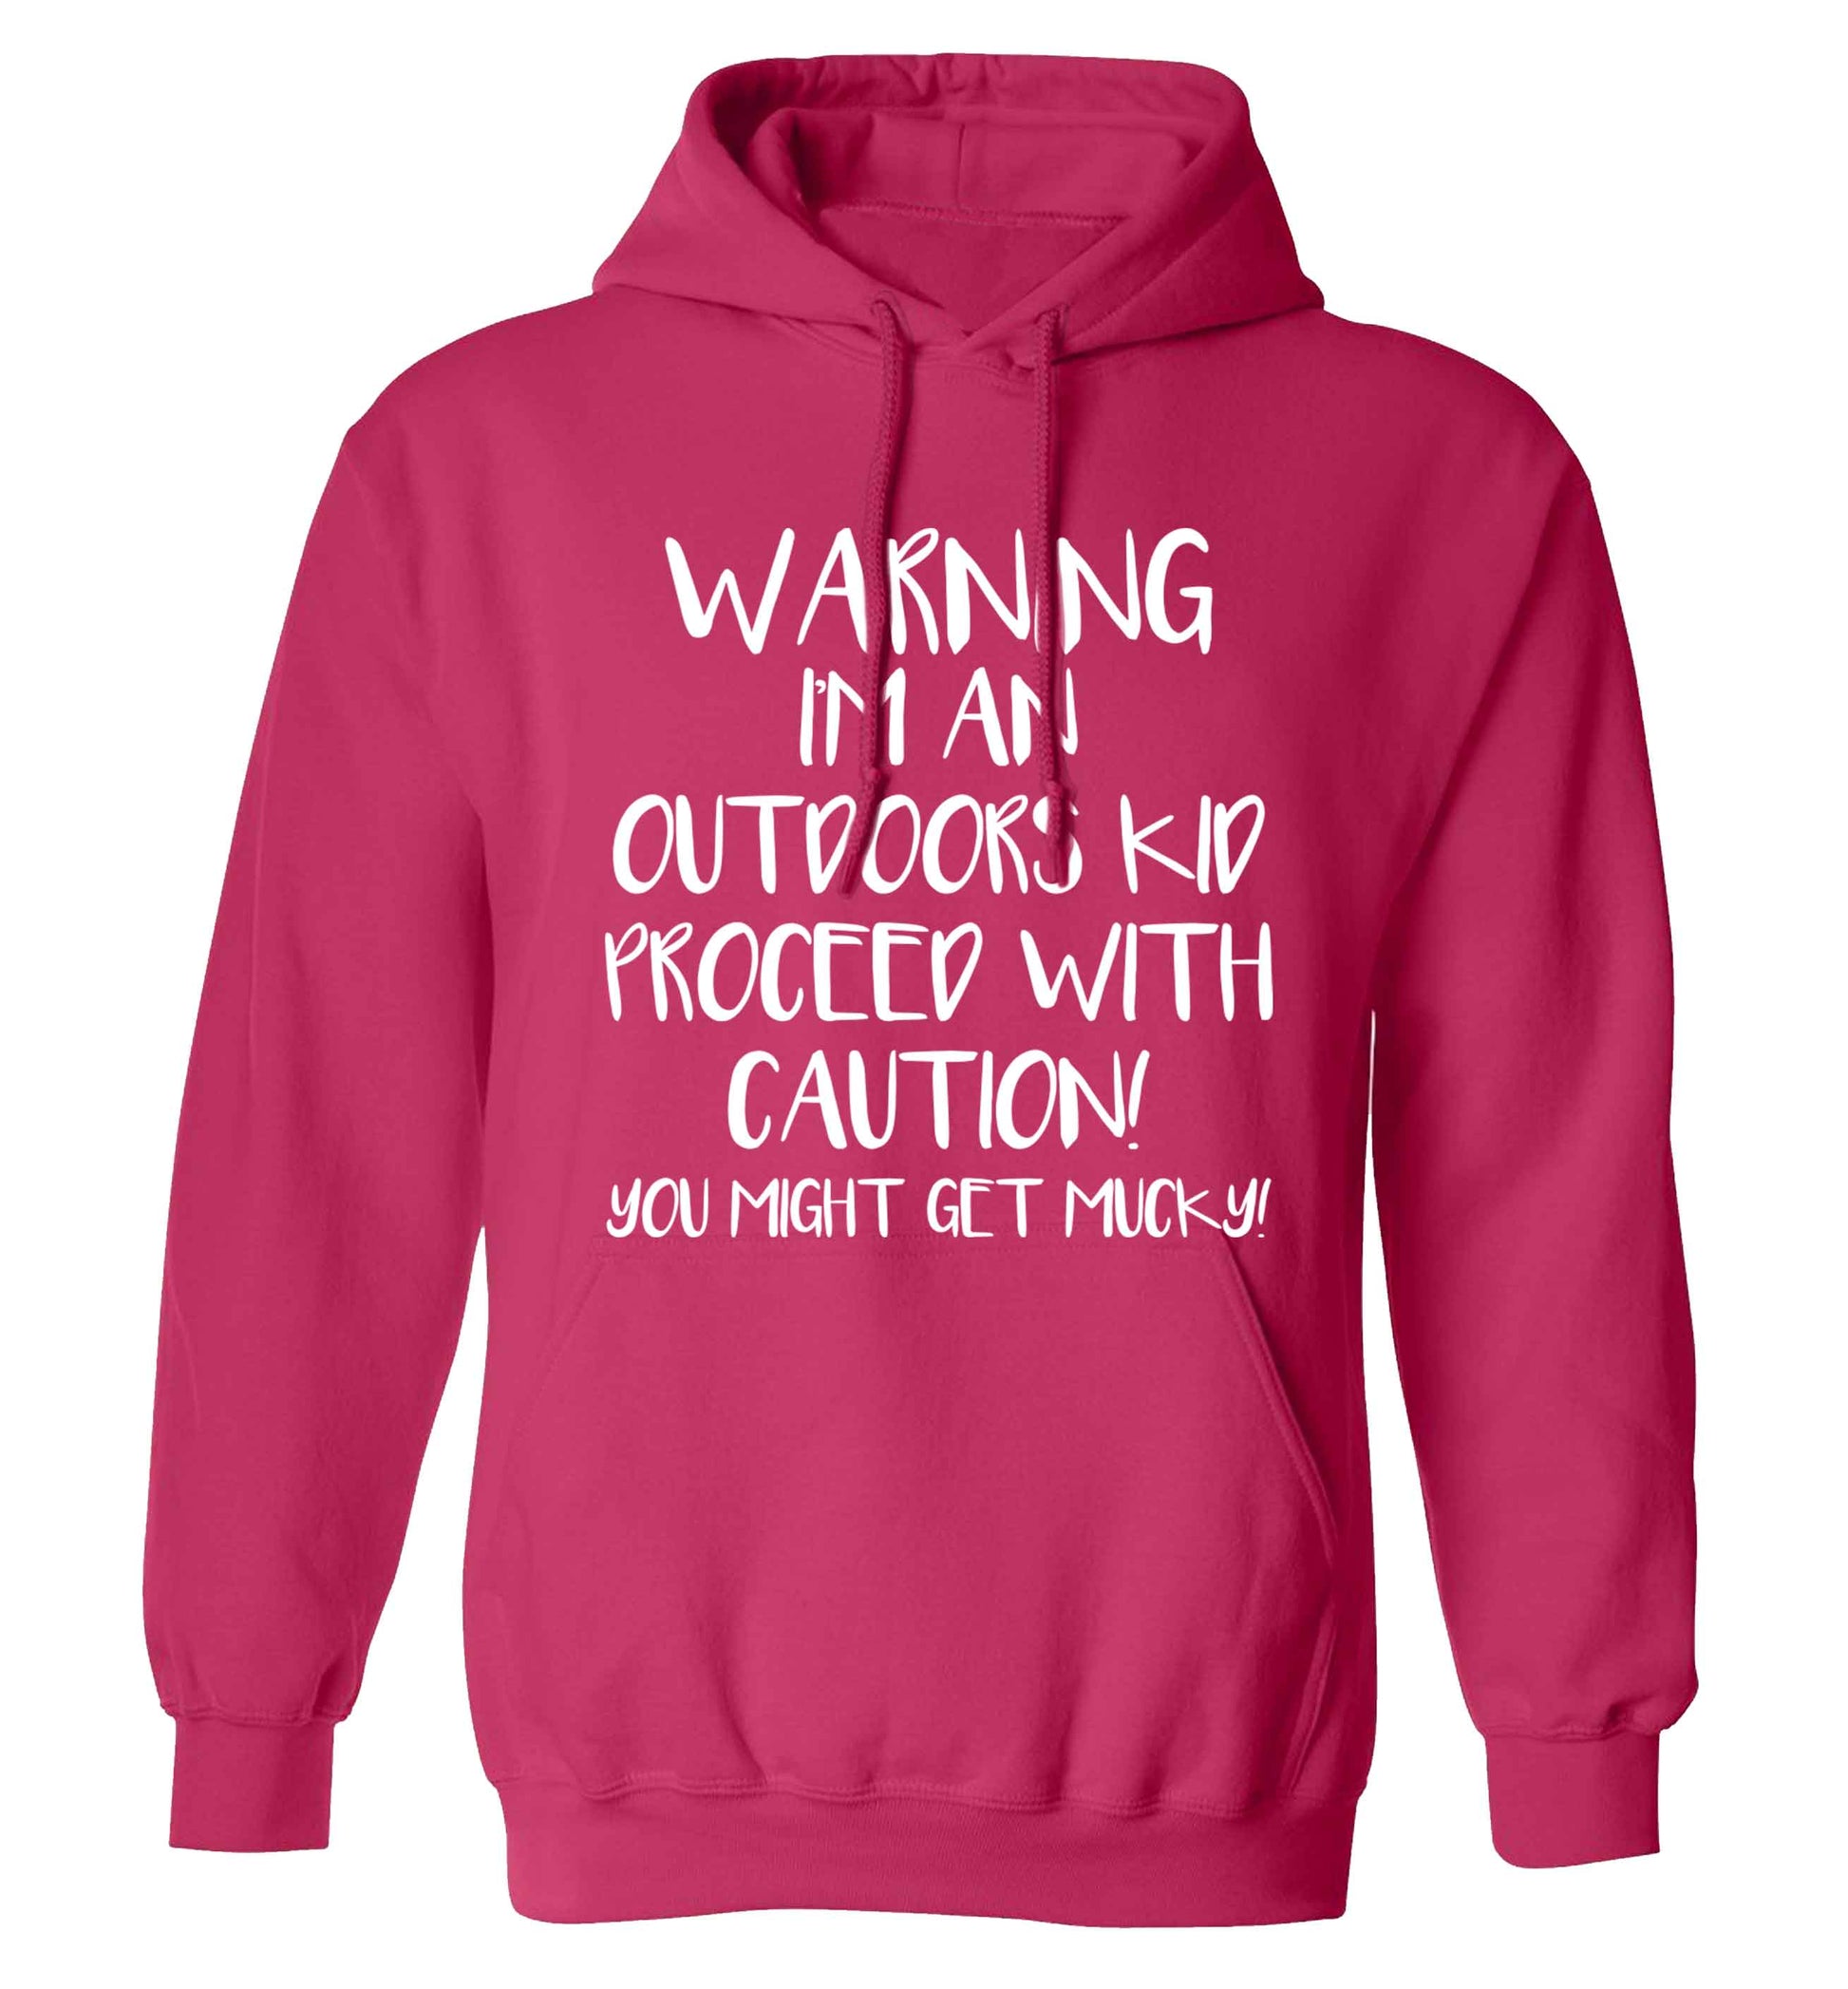 Warning I'm an outdoors kid! Proceed with caution you might get mucky adults unisex pink hoodie 2XL